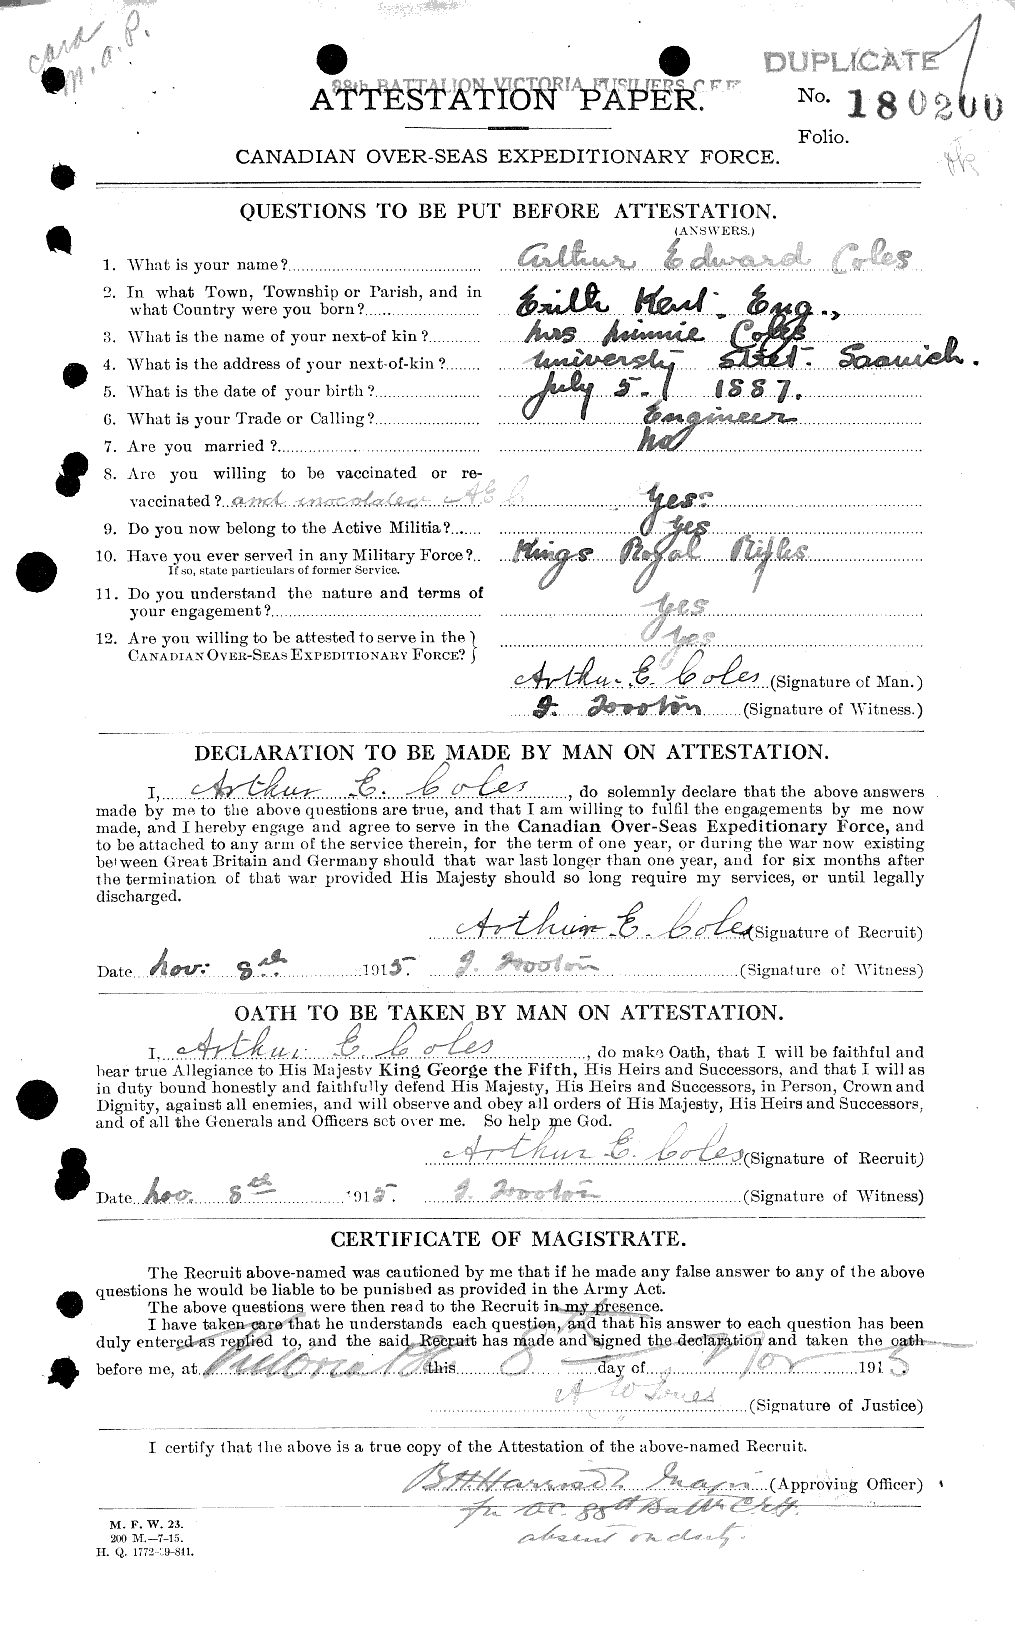 Personnel Records of the First World War - CEF 028341a